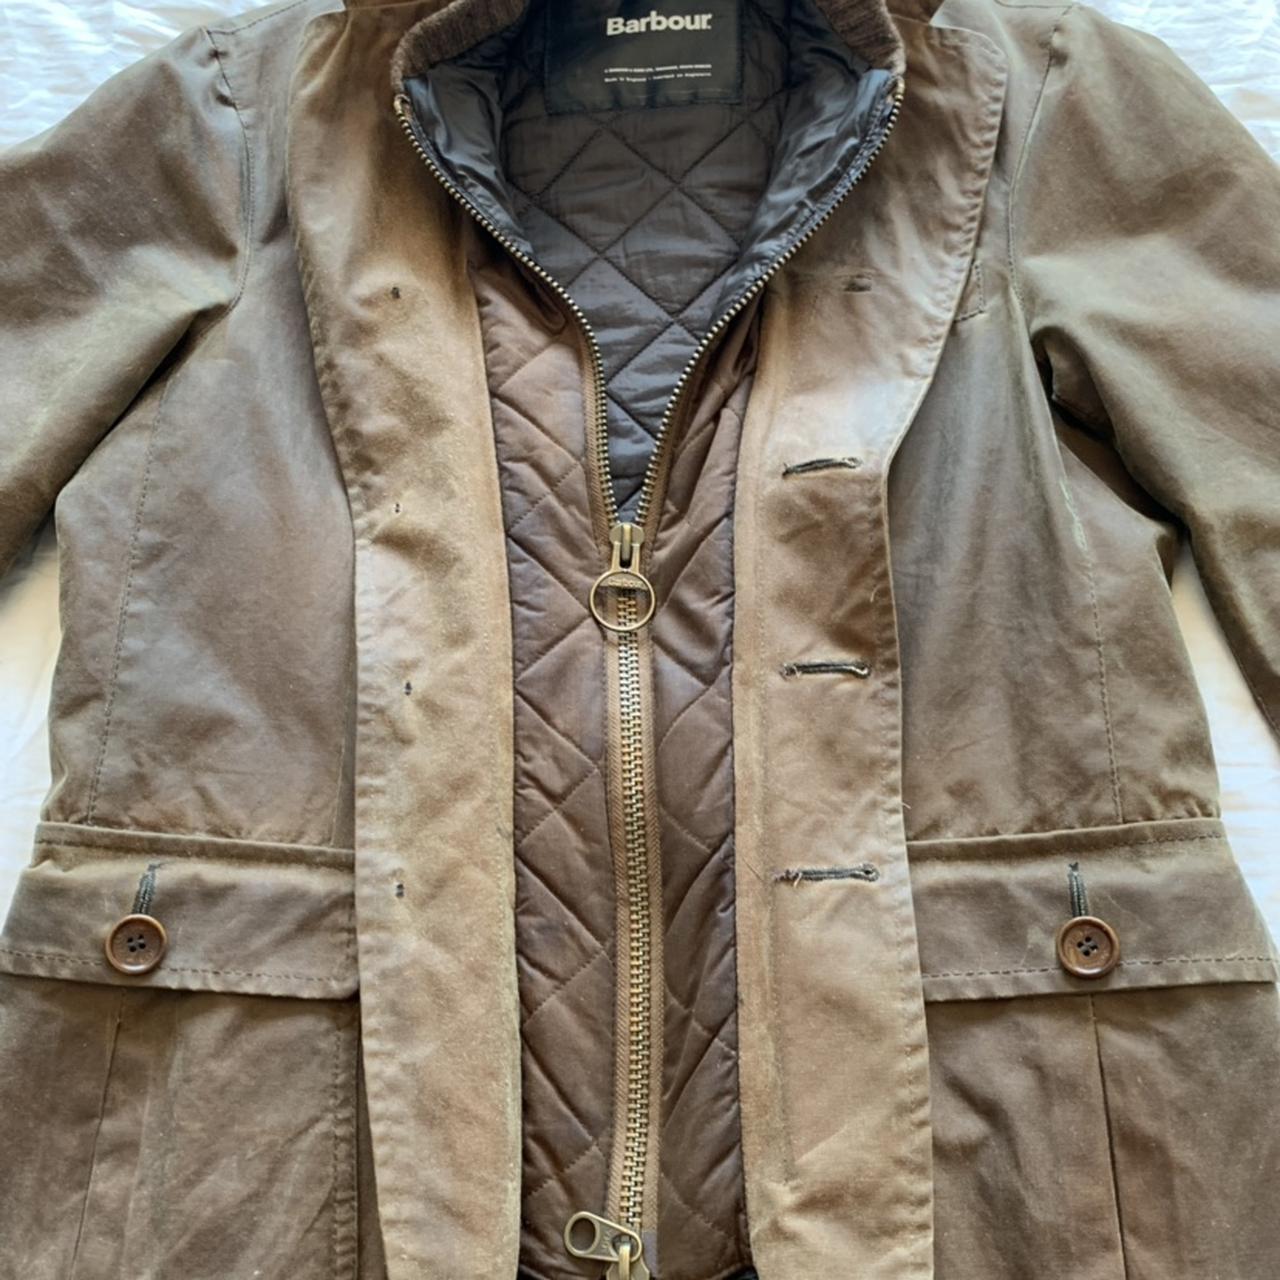 Extremely rare Barbour Lumley waxed jacket. Never... - Depop